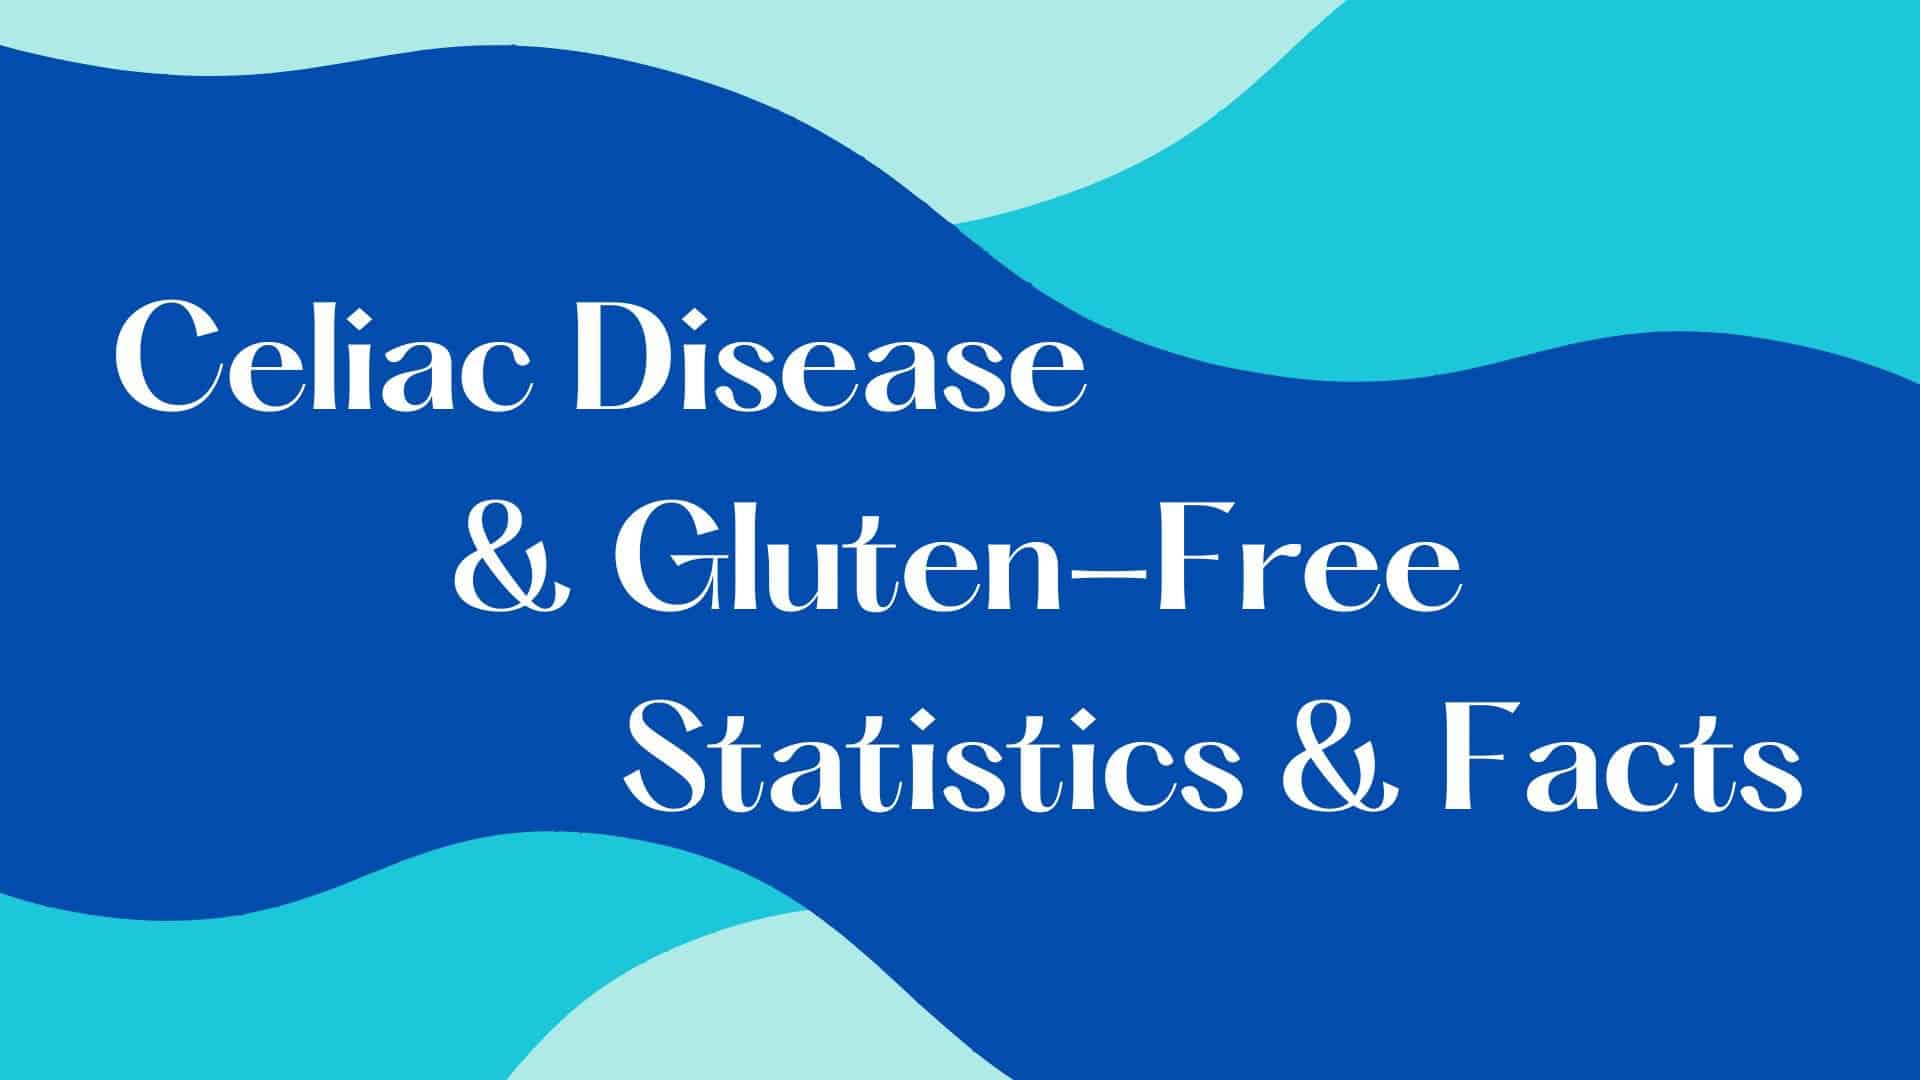 blue wavy lines in different variations of blue, text: Celiac Disease & Gluten-Free Statistics & Facts